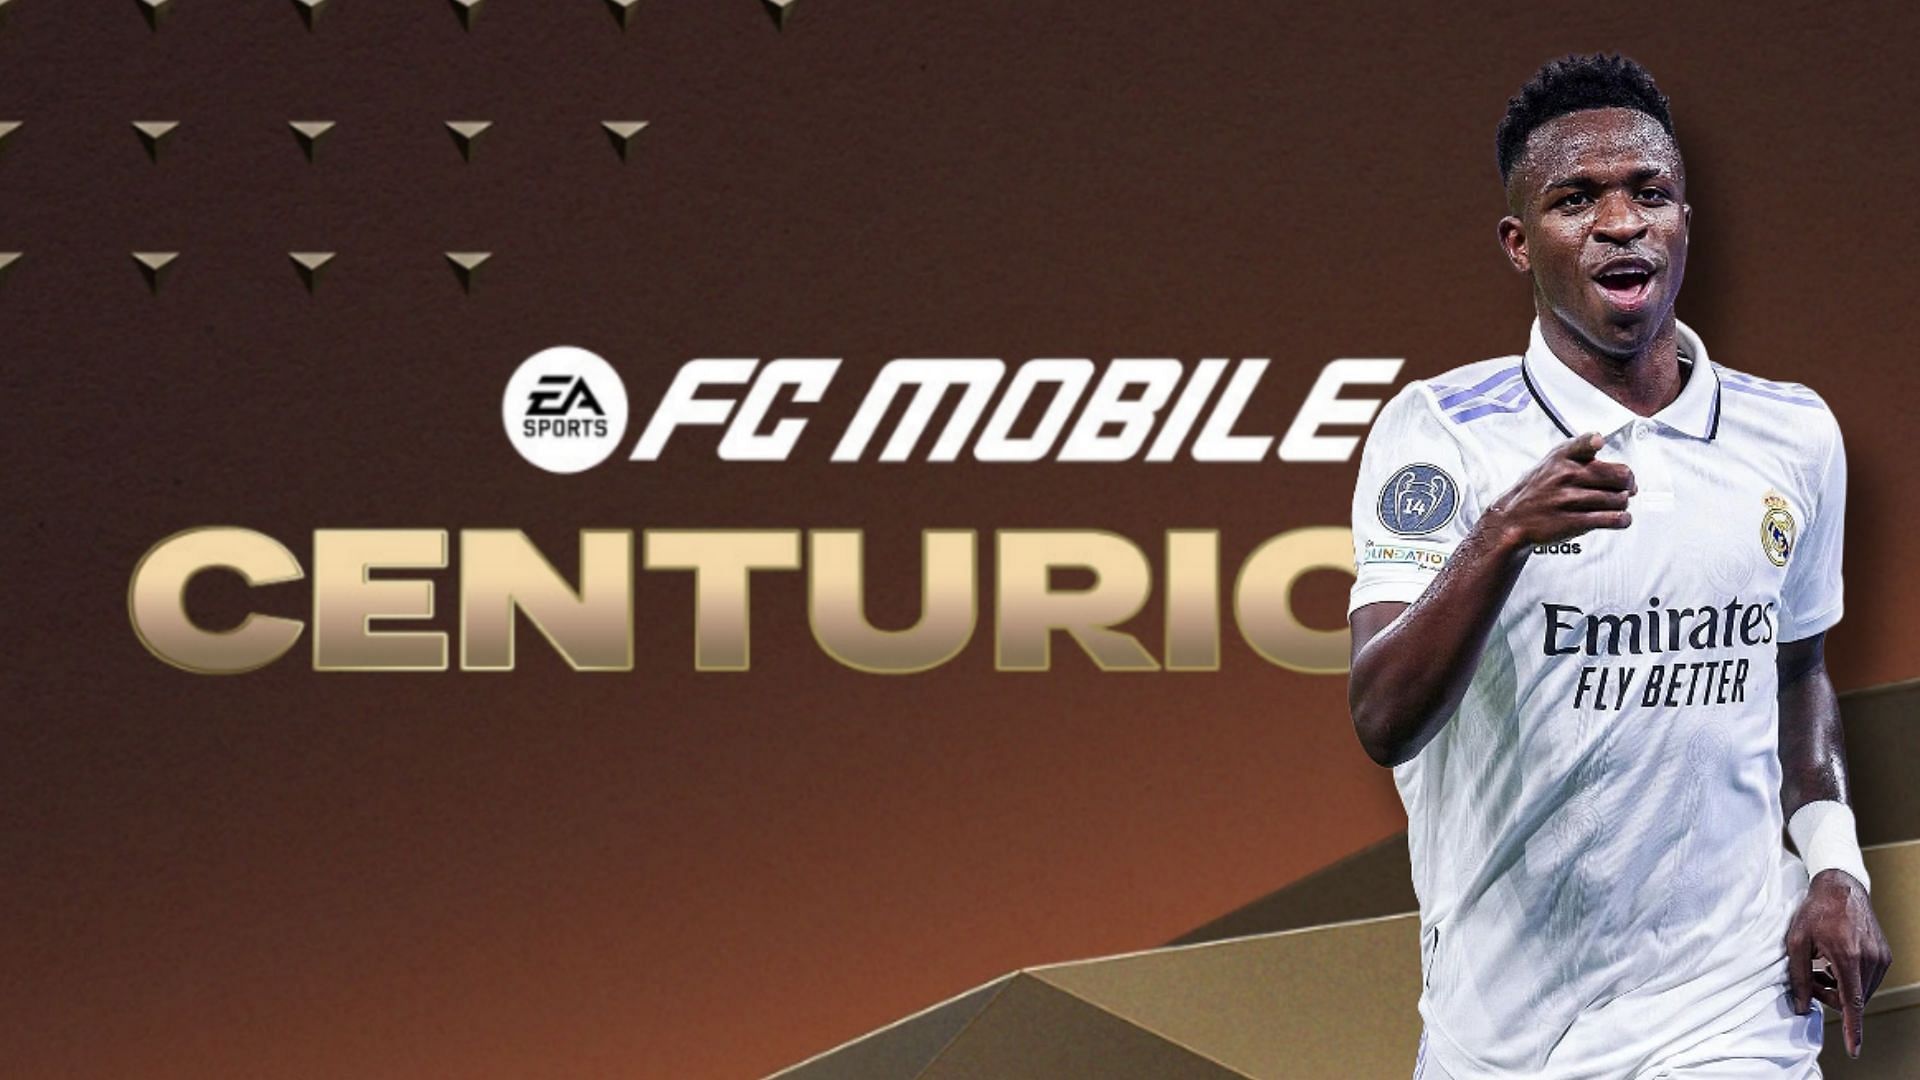 Find Centurions chapter in FC Mobile Centurions promo offers stunning rewards (Image via EA Sports) 